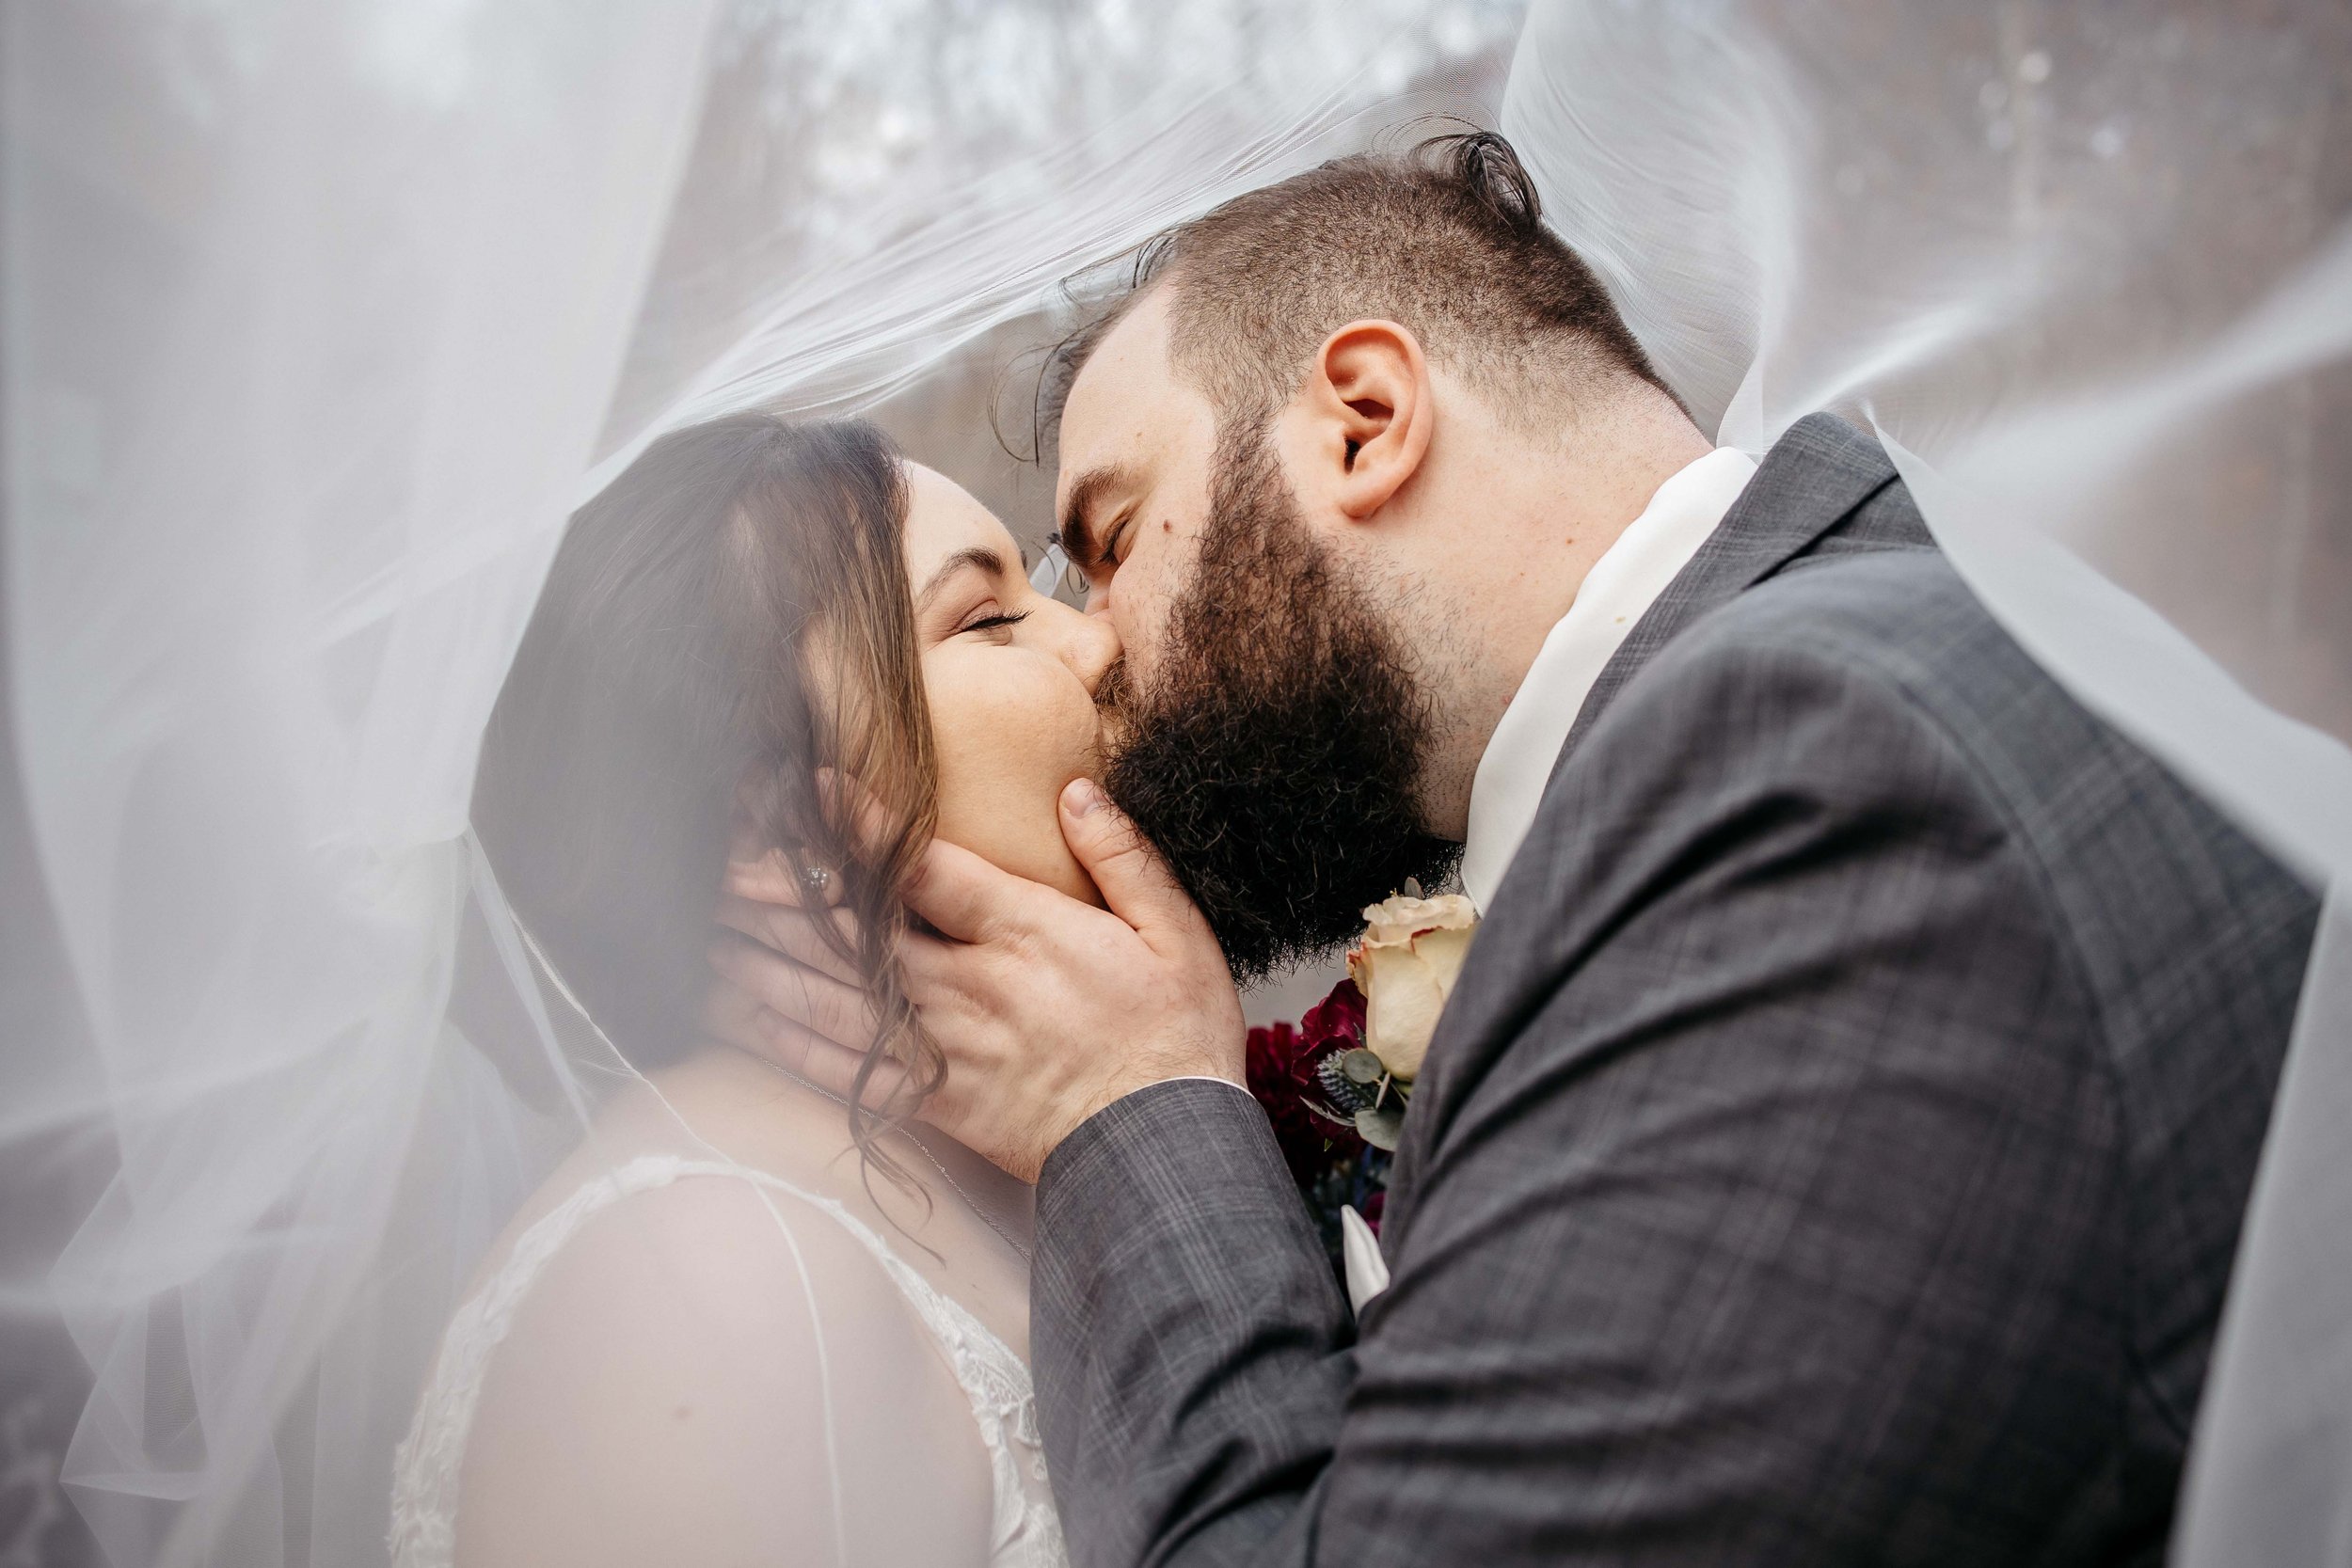 A bride and groom kiss under a cathedral veil.